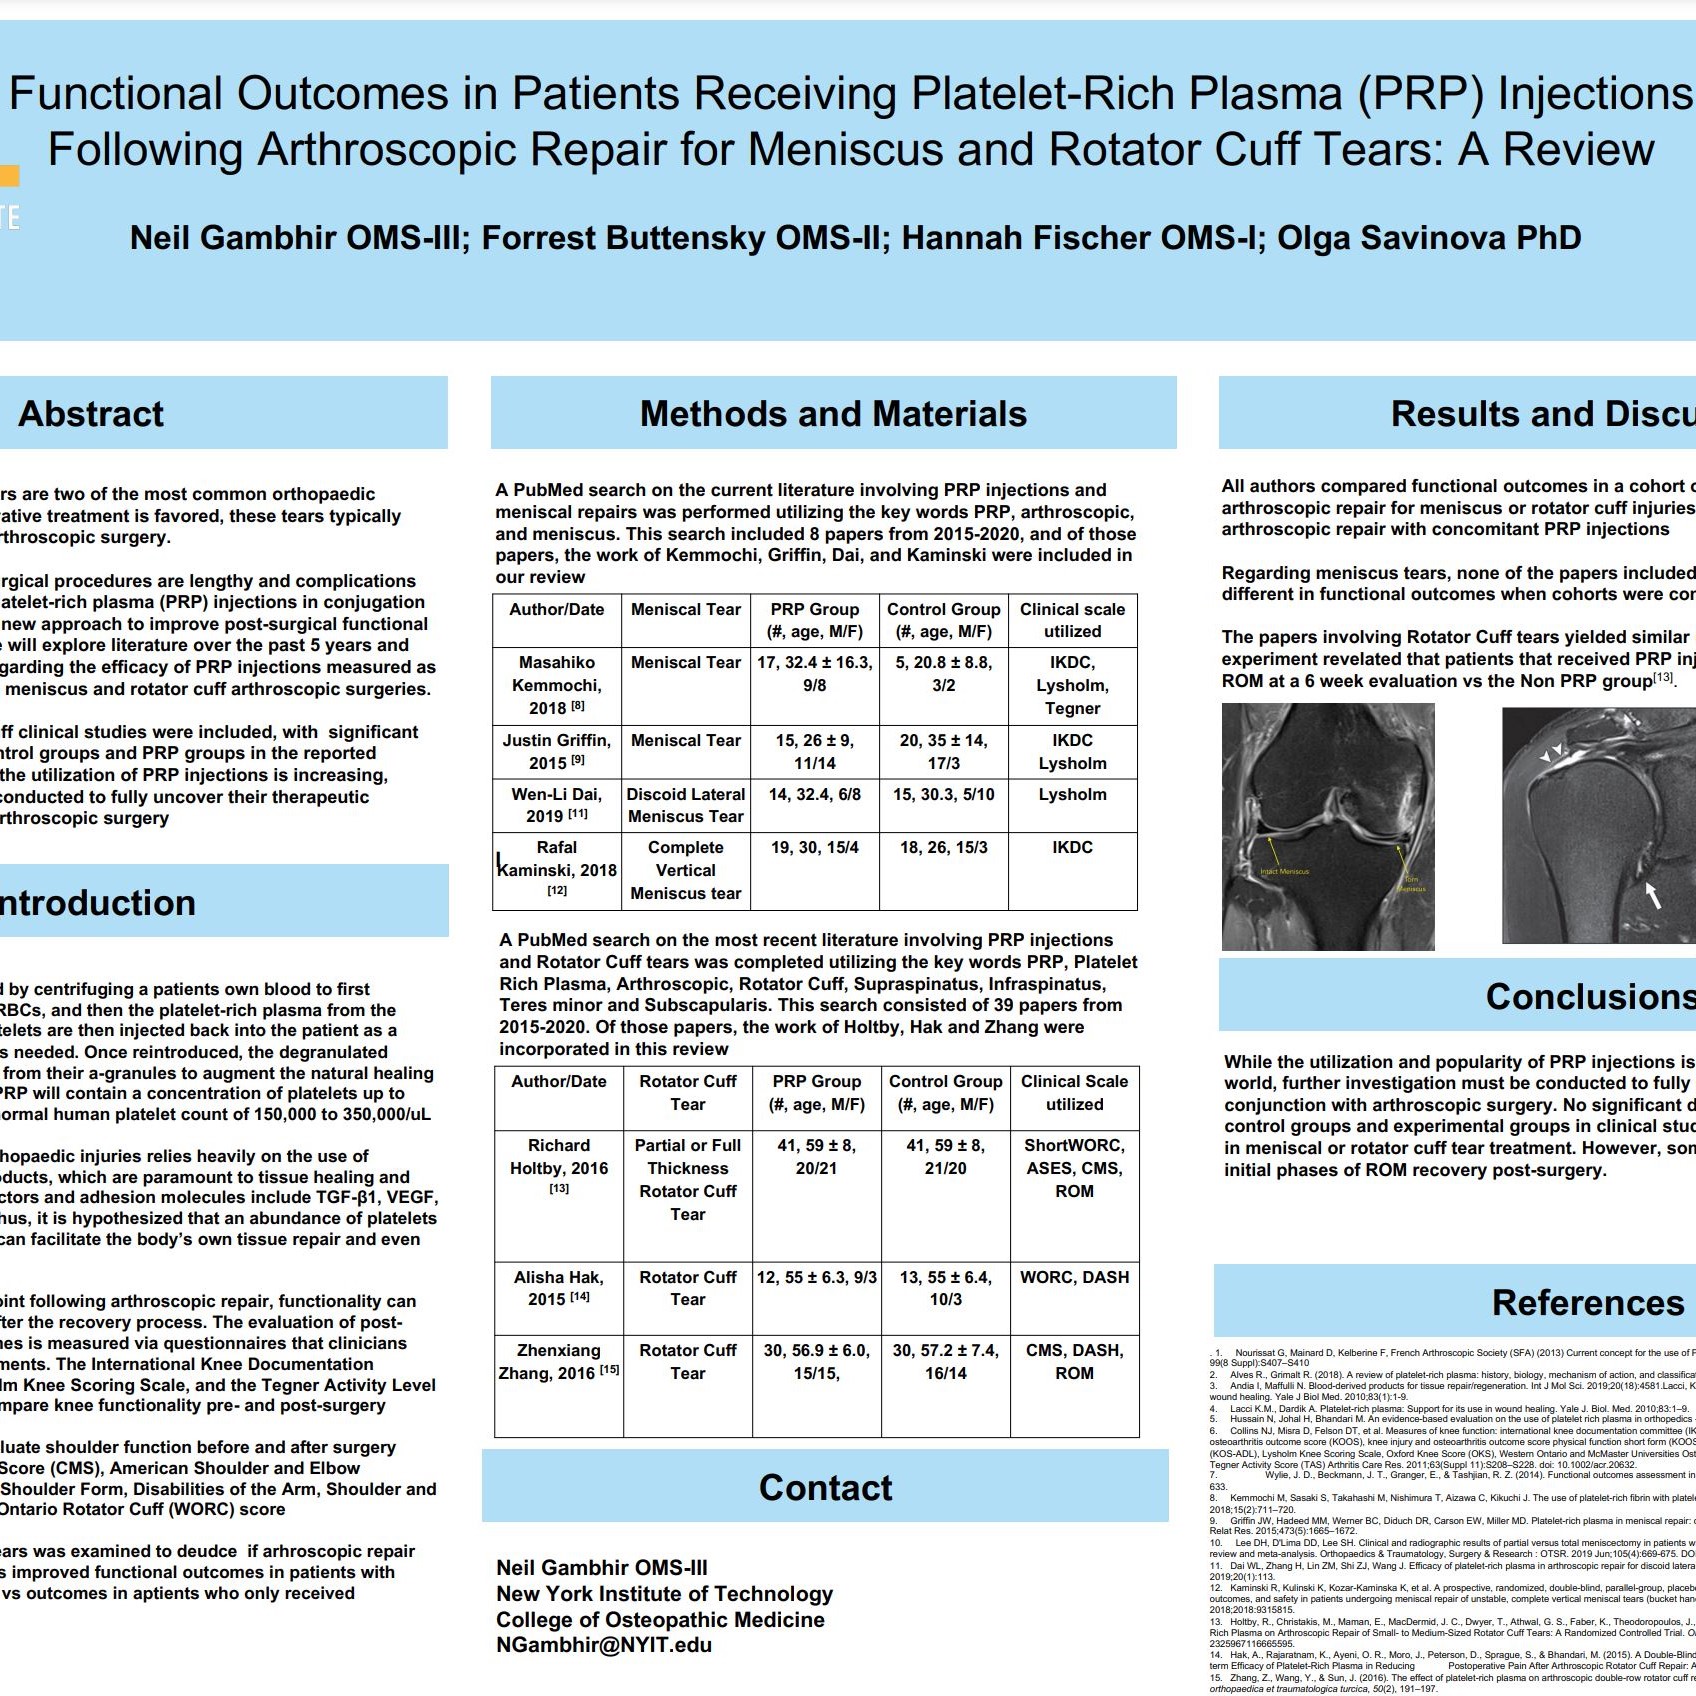 Functional Outcomes in Patients Receiving Platelet-Rich Plasma (PRP) Injections
Following Arthroscopic Repair for Meniscus and Rotator Cuff Tears: A Review